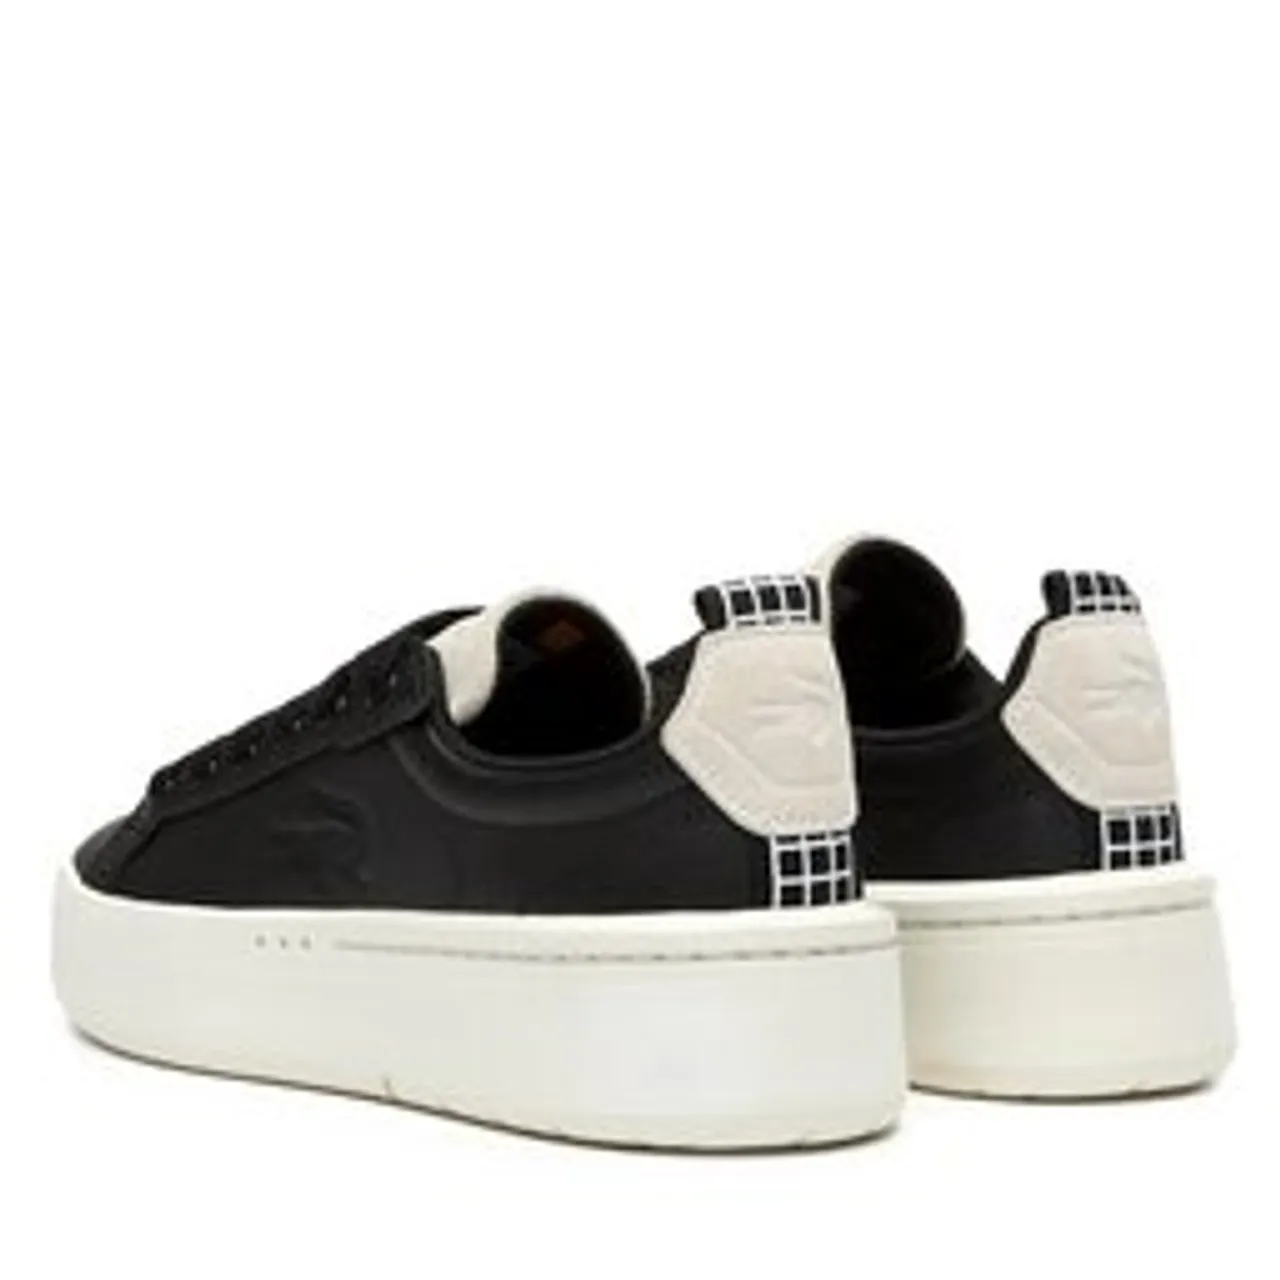 Sneakers Lacoste Carnaby Platform 745SFA0040 Blk/Off Wht 454